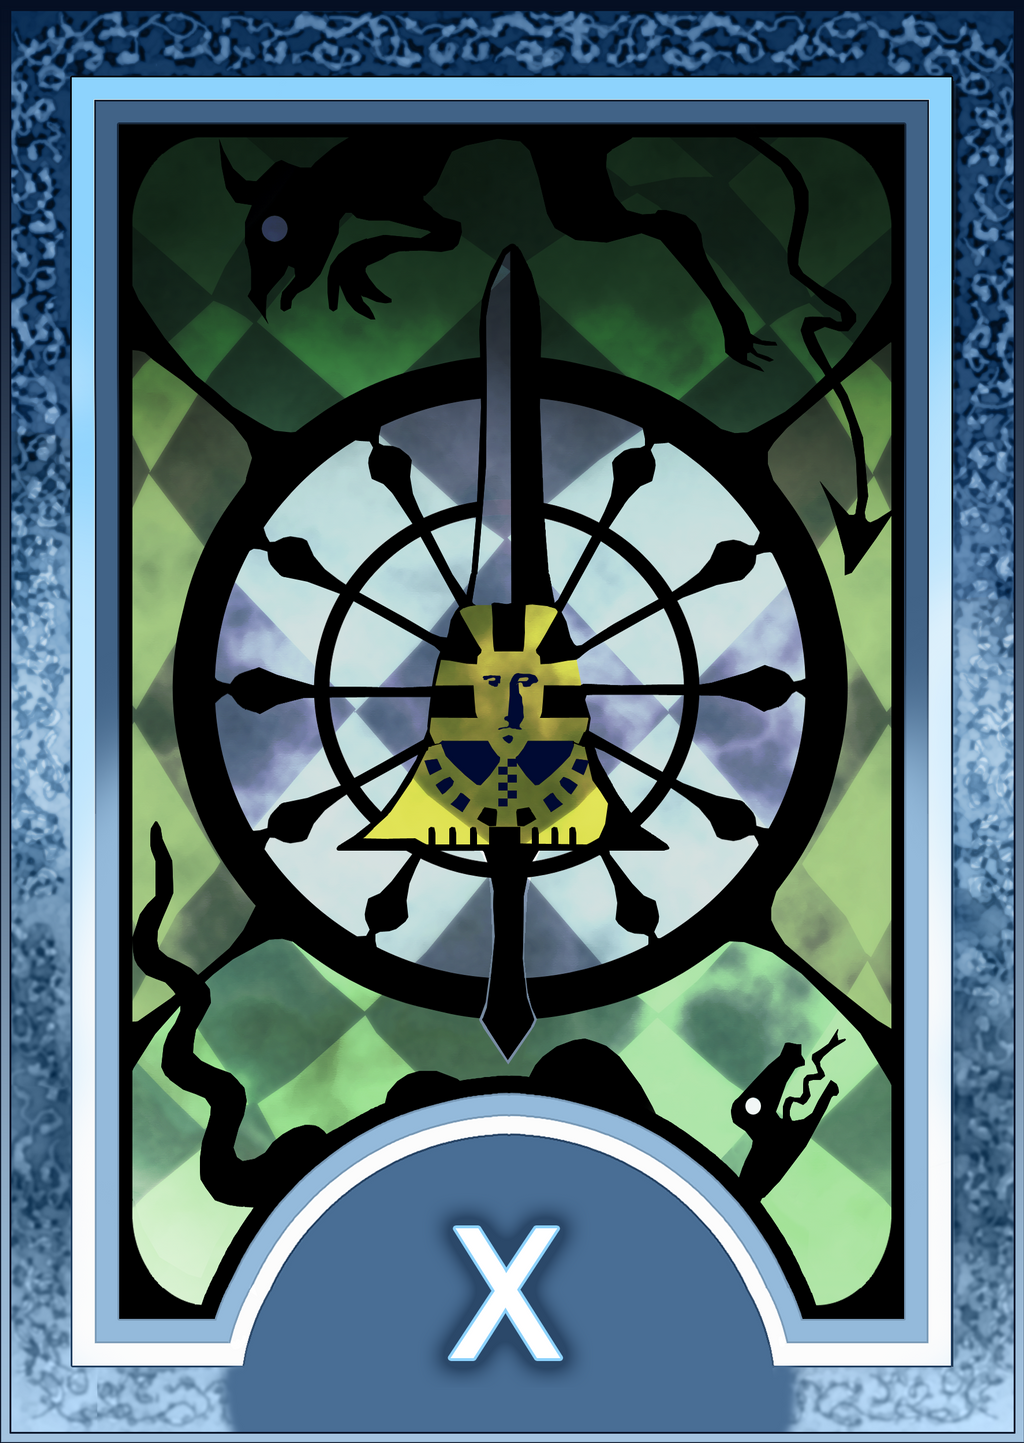 Persona 3/4 Tarot Card Deck HR Fortune Arcana by